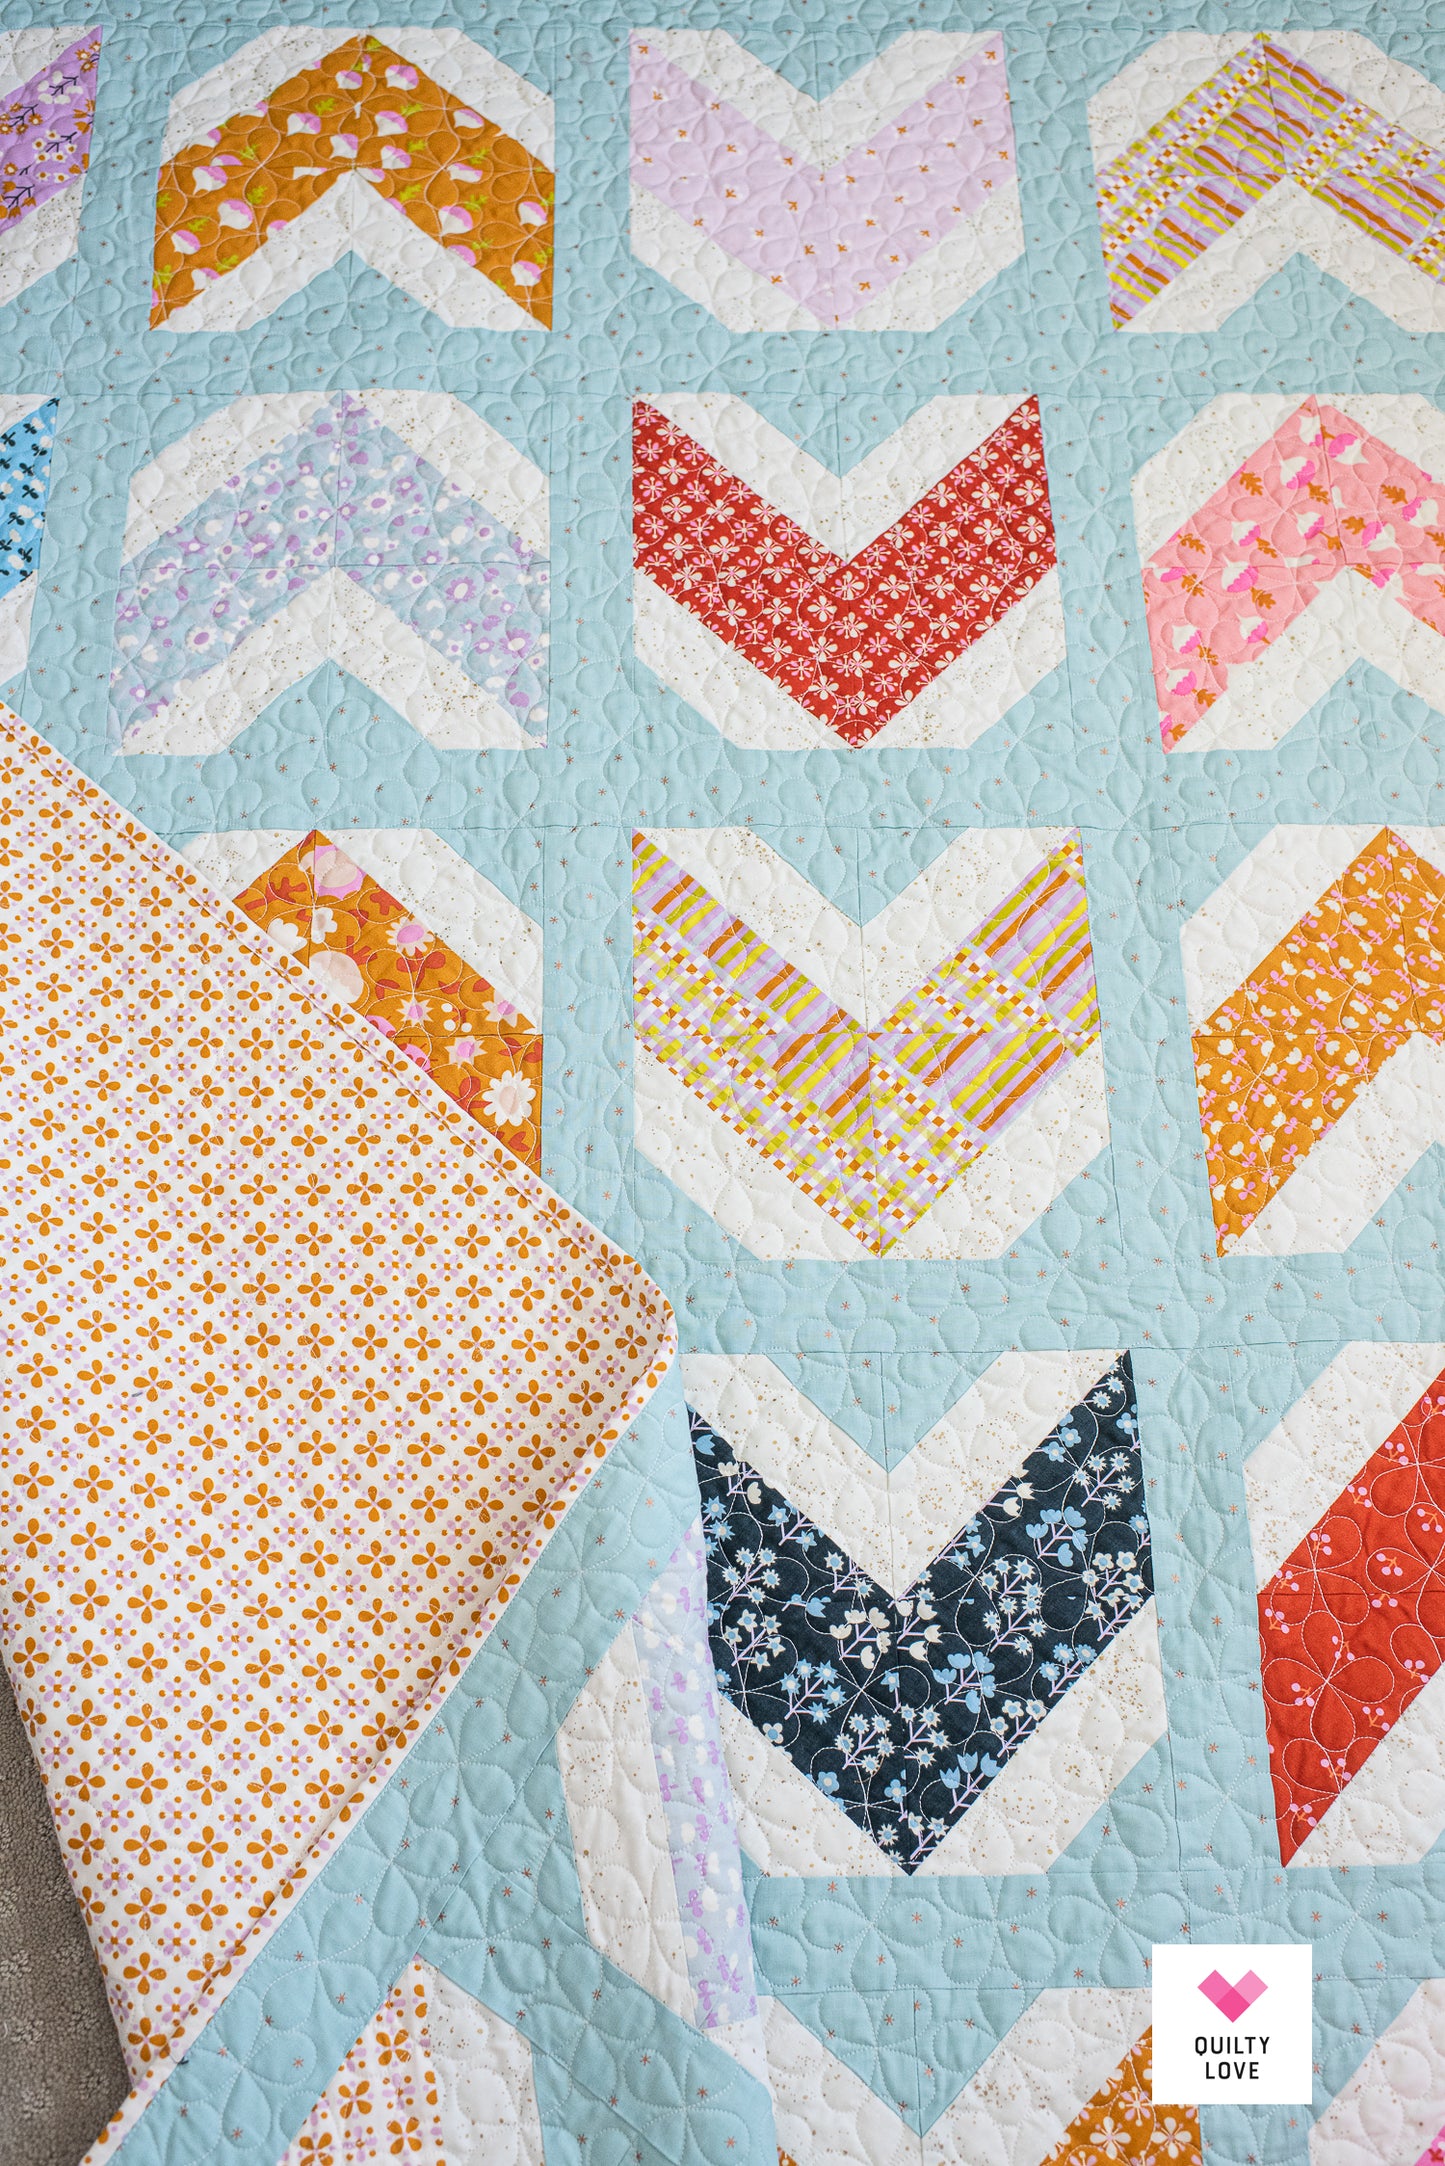 Quilty Arrows PAPER quilt pattern